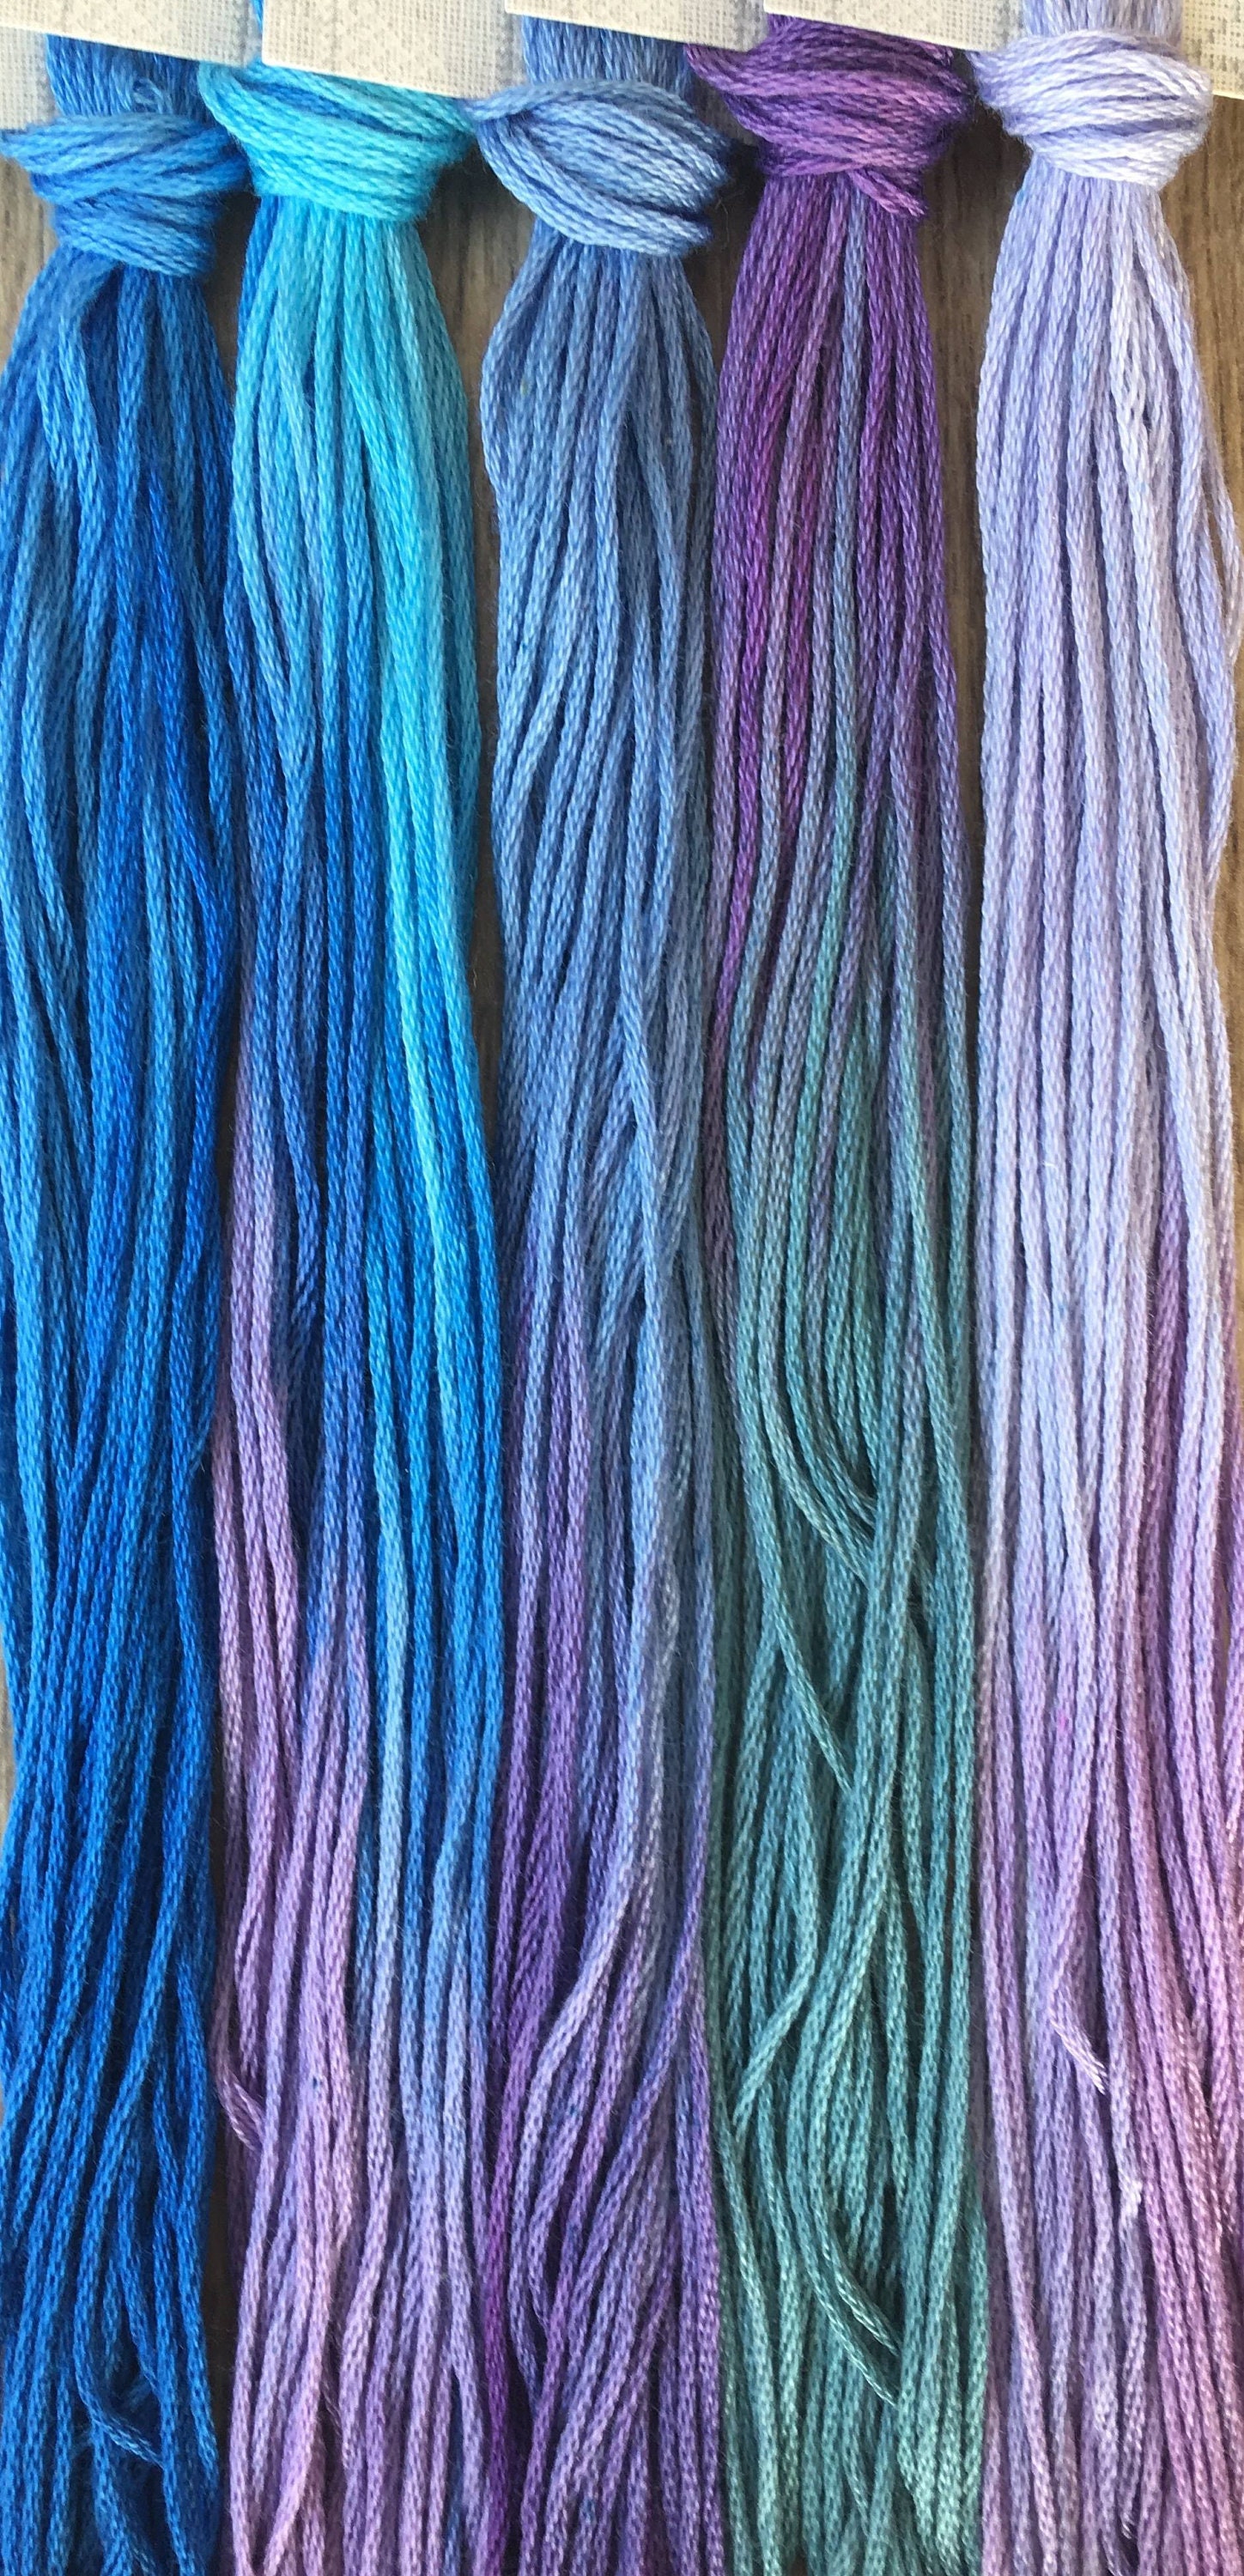 Indie Dyed Stitching Floss Over dyed thread Bleuet Variegated Floss Cross stitch threads Blackwork NEW Le Fil Atalie Hand dyed Floss